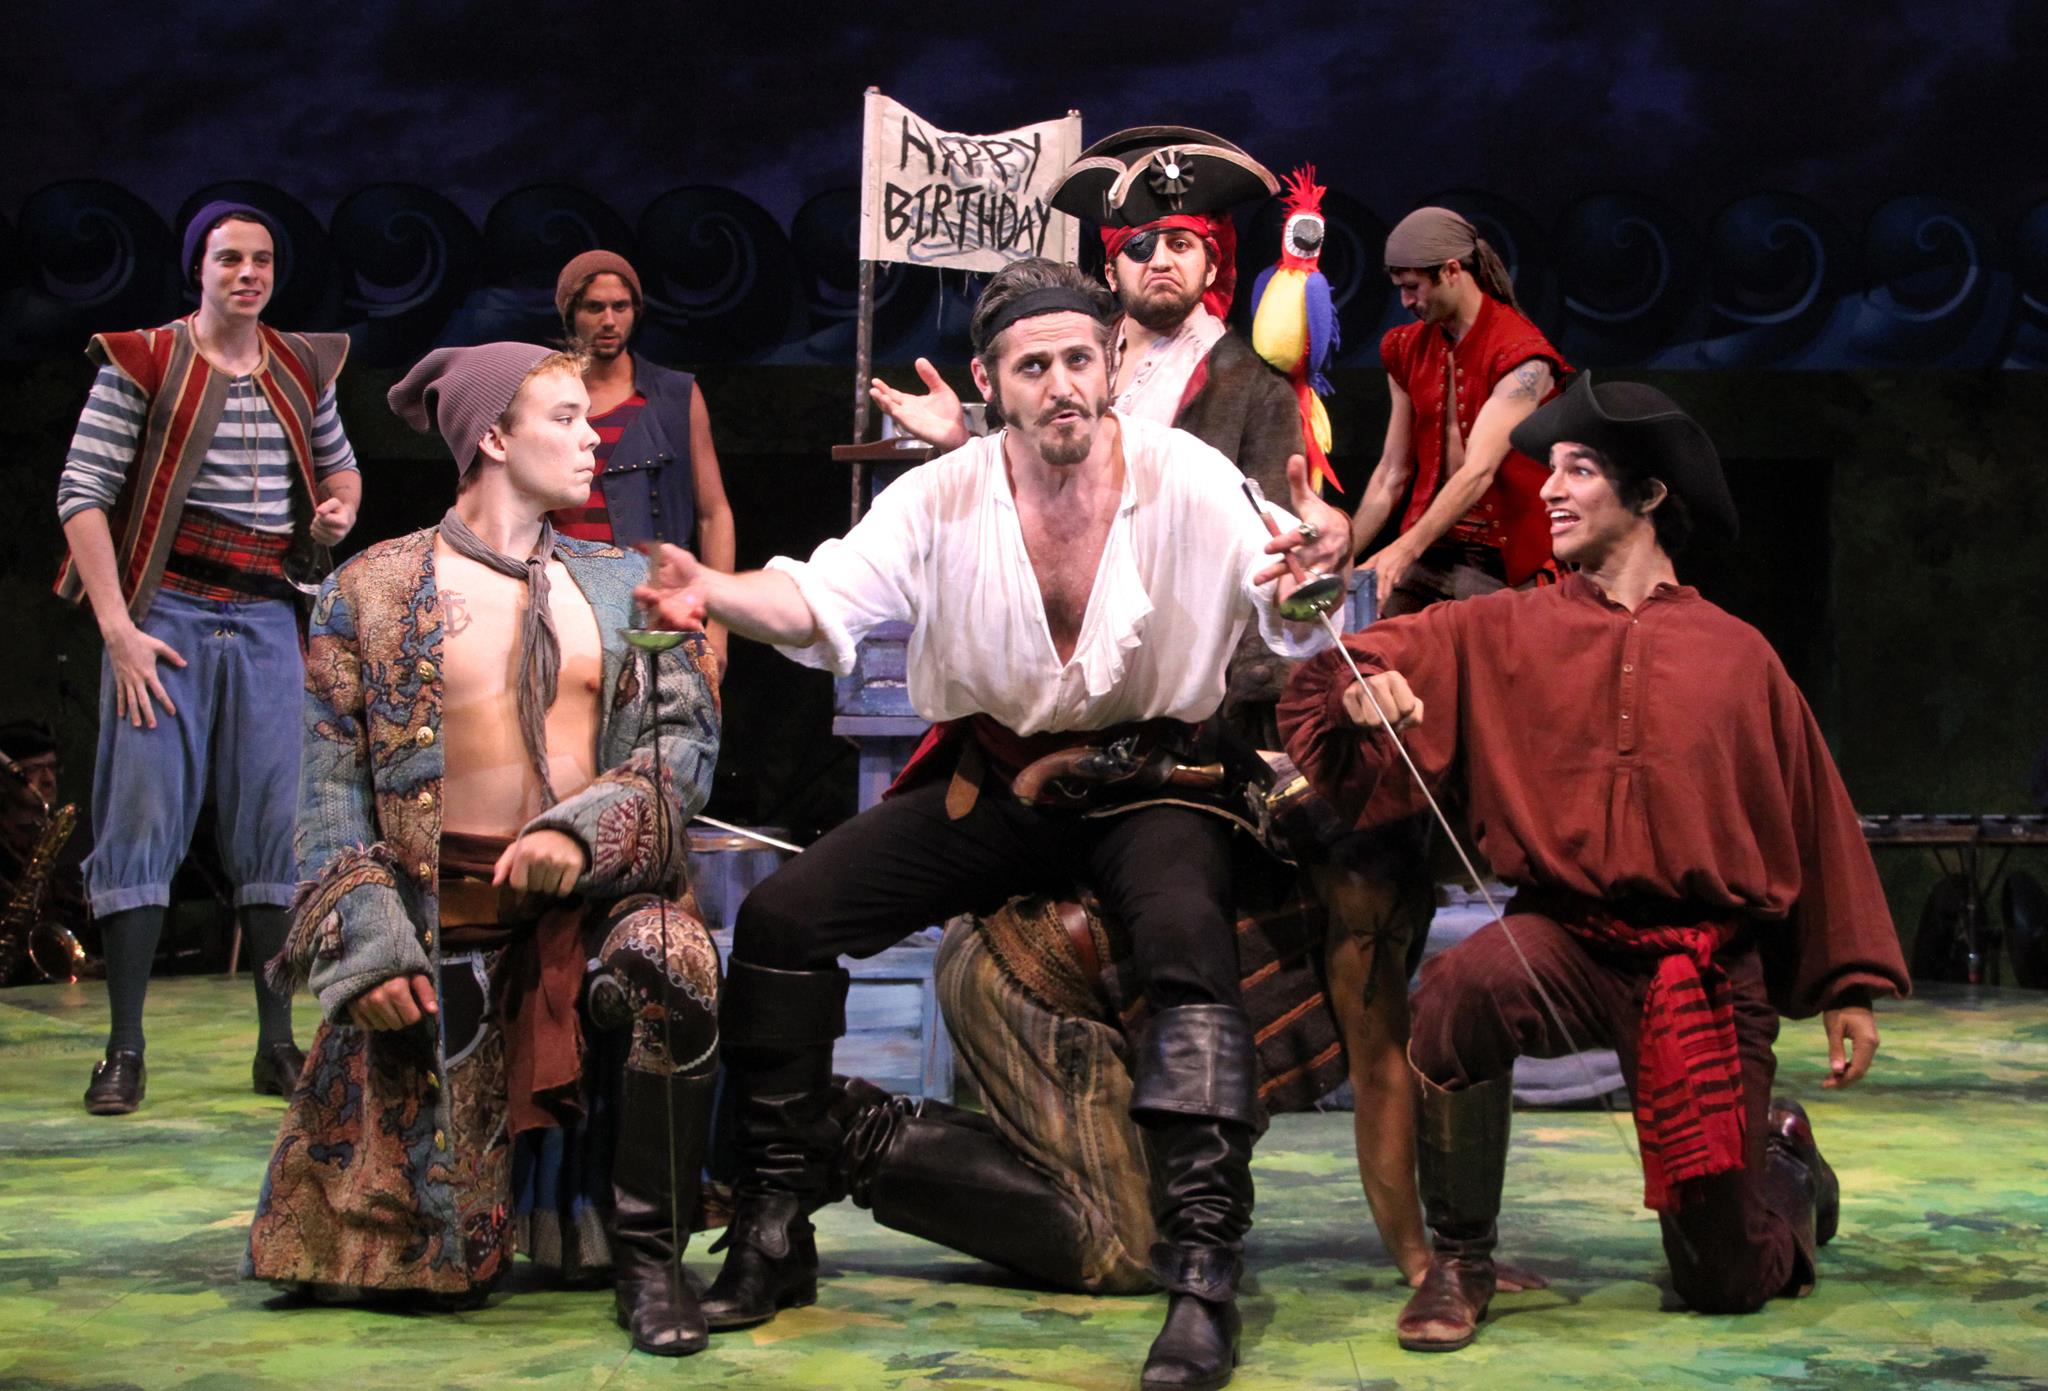  Sean Hingston in The Pirates of Penzance directed by Terrence Mann 